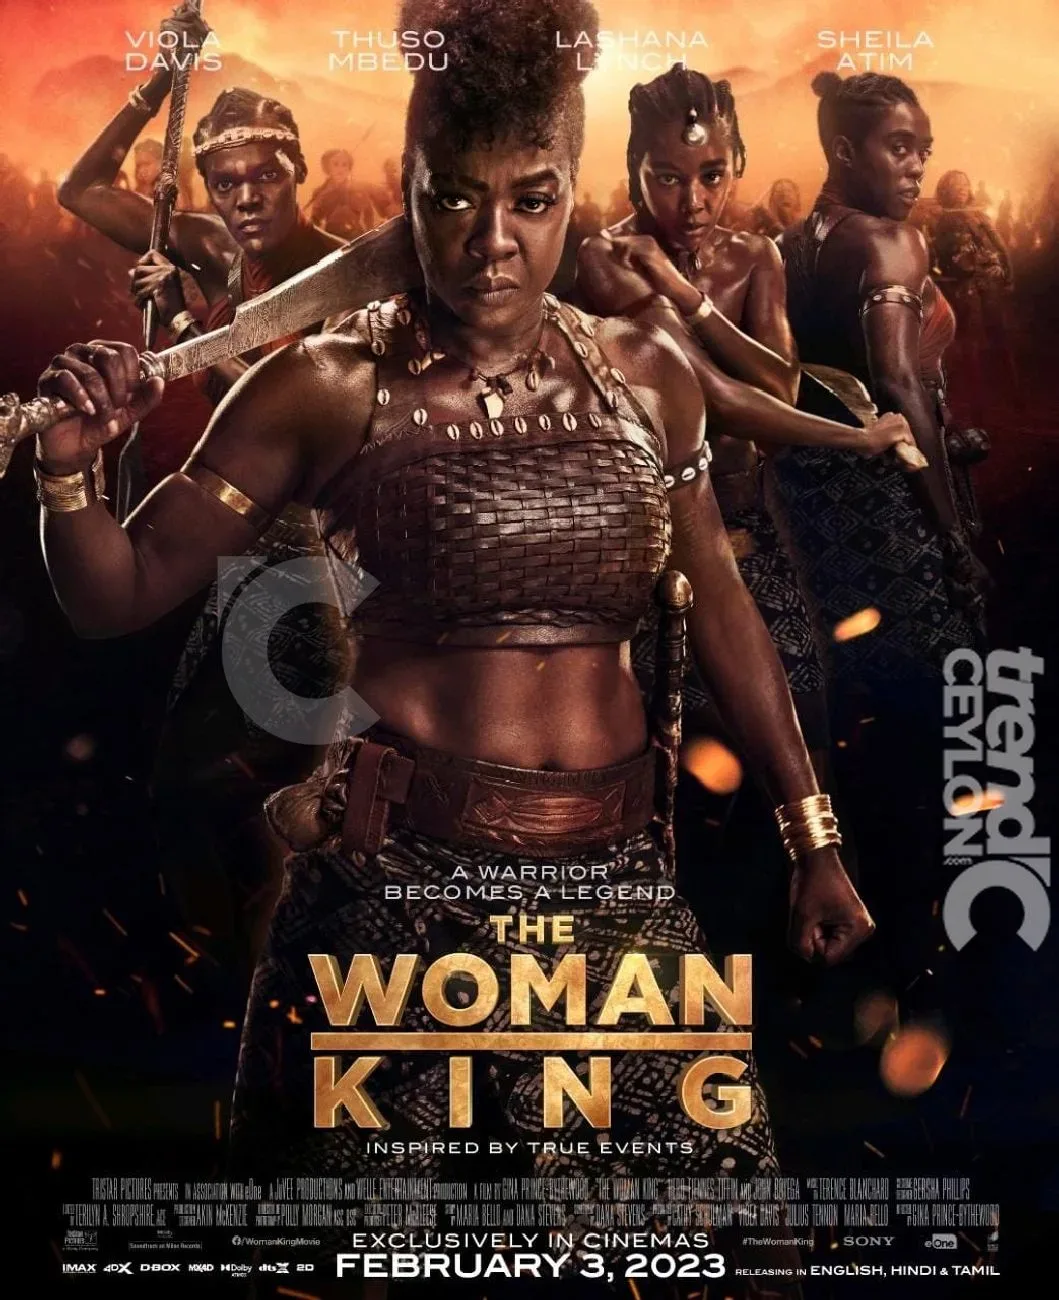 The Woman King | Cast | Trailer | News | Songs | Stills | Review